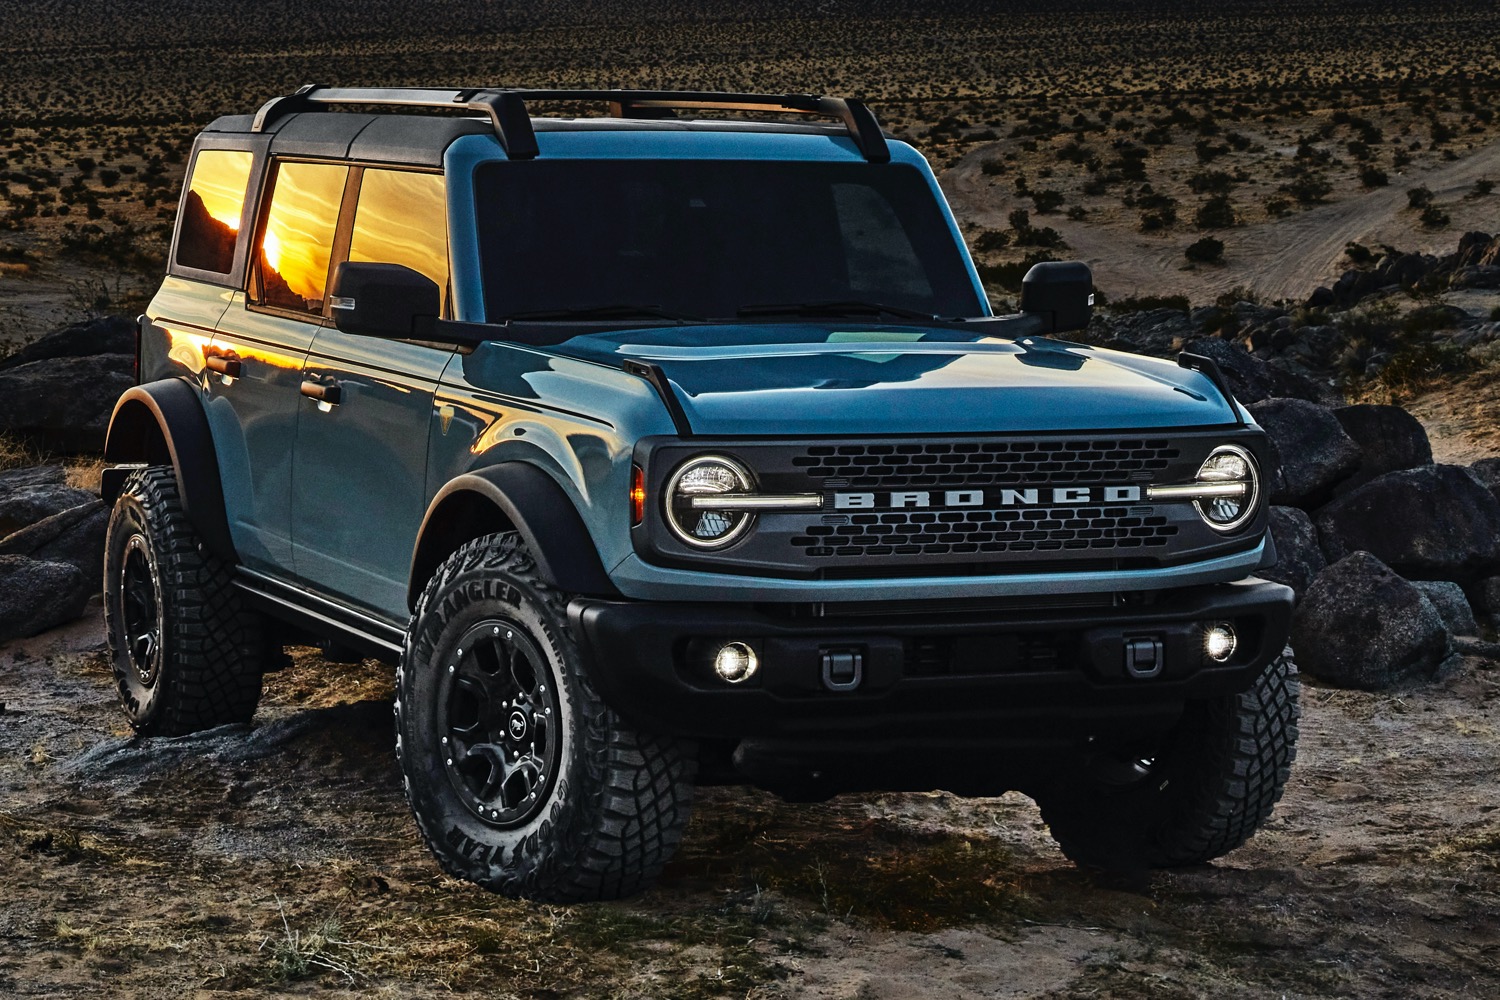 Paxpower Announces Pair Of V8 Powered 2021 Bronco Variants